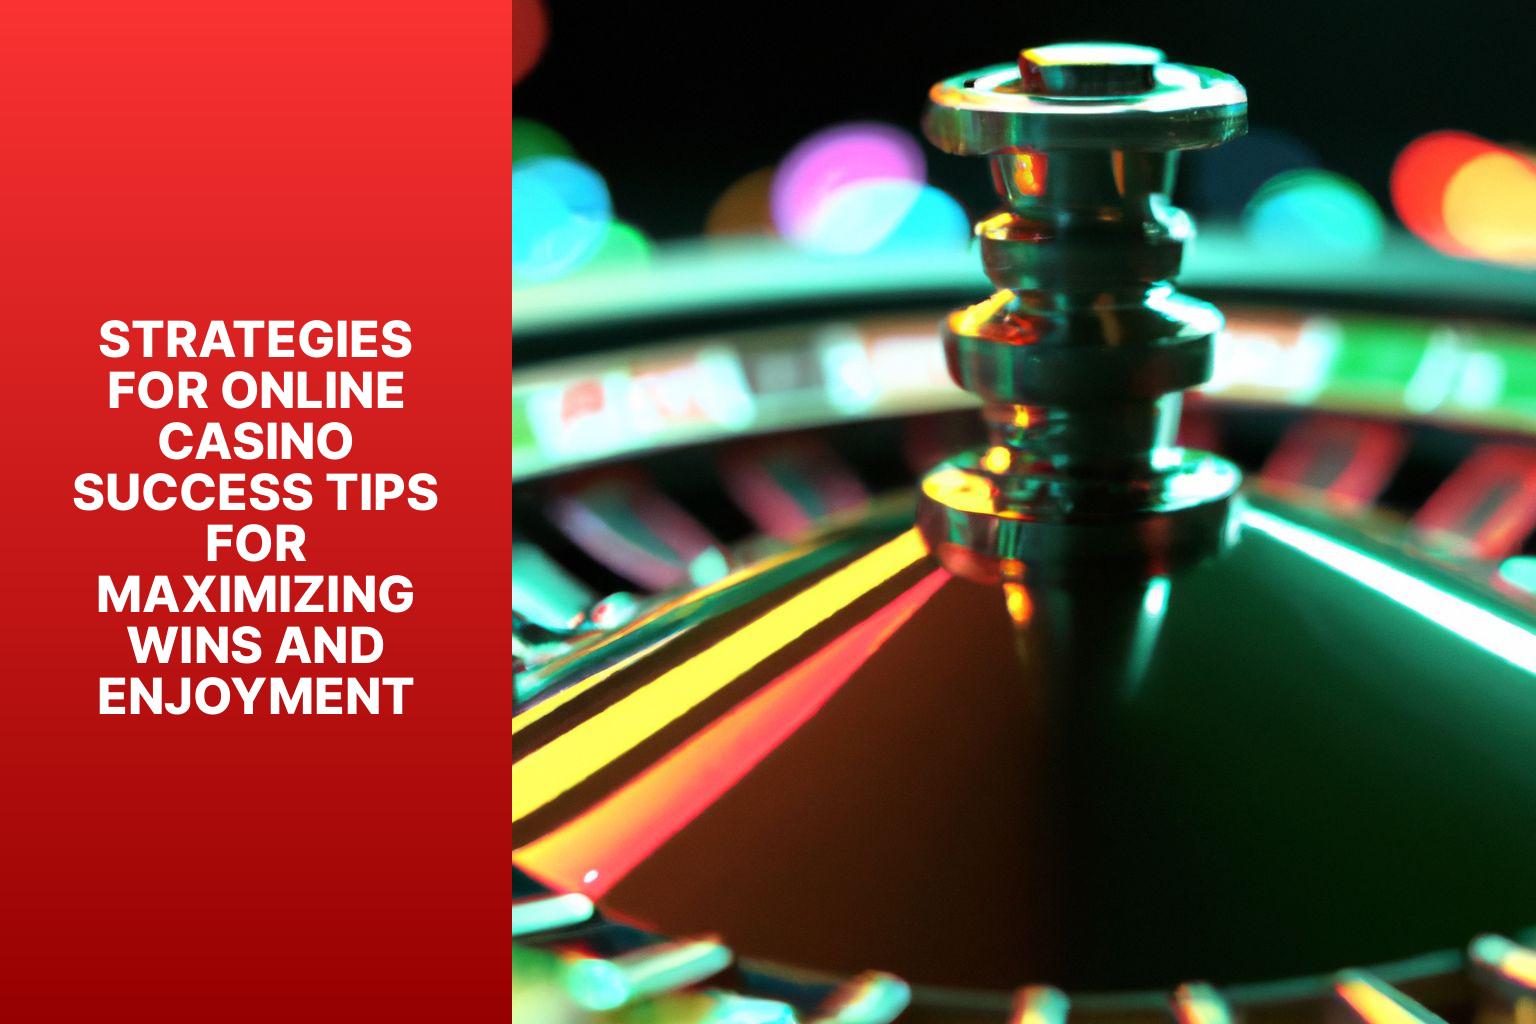 Strategies for Online Casino Success Tips for Maximizing Wins and Enjoyment